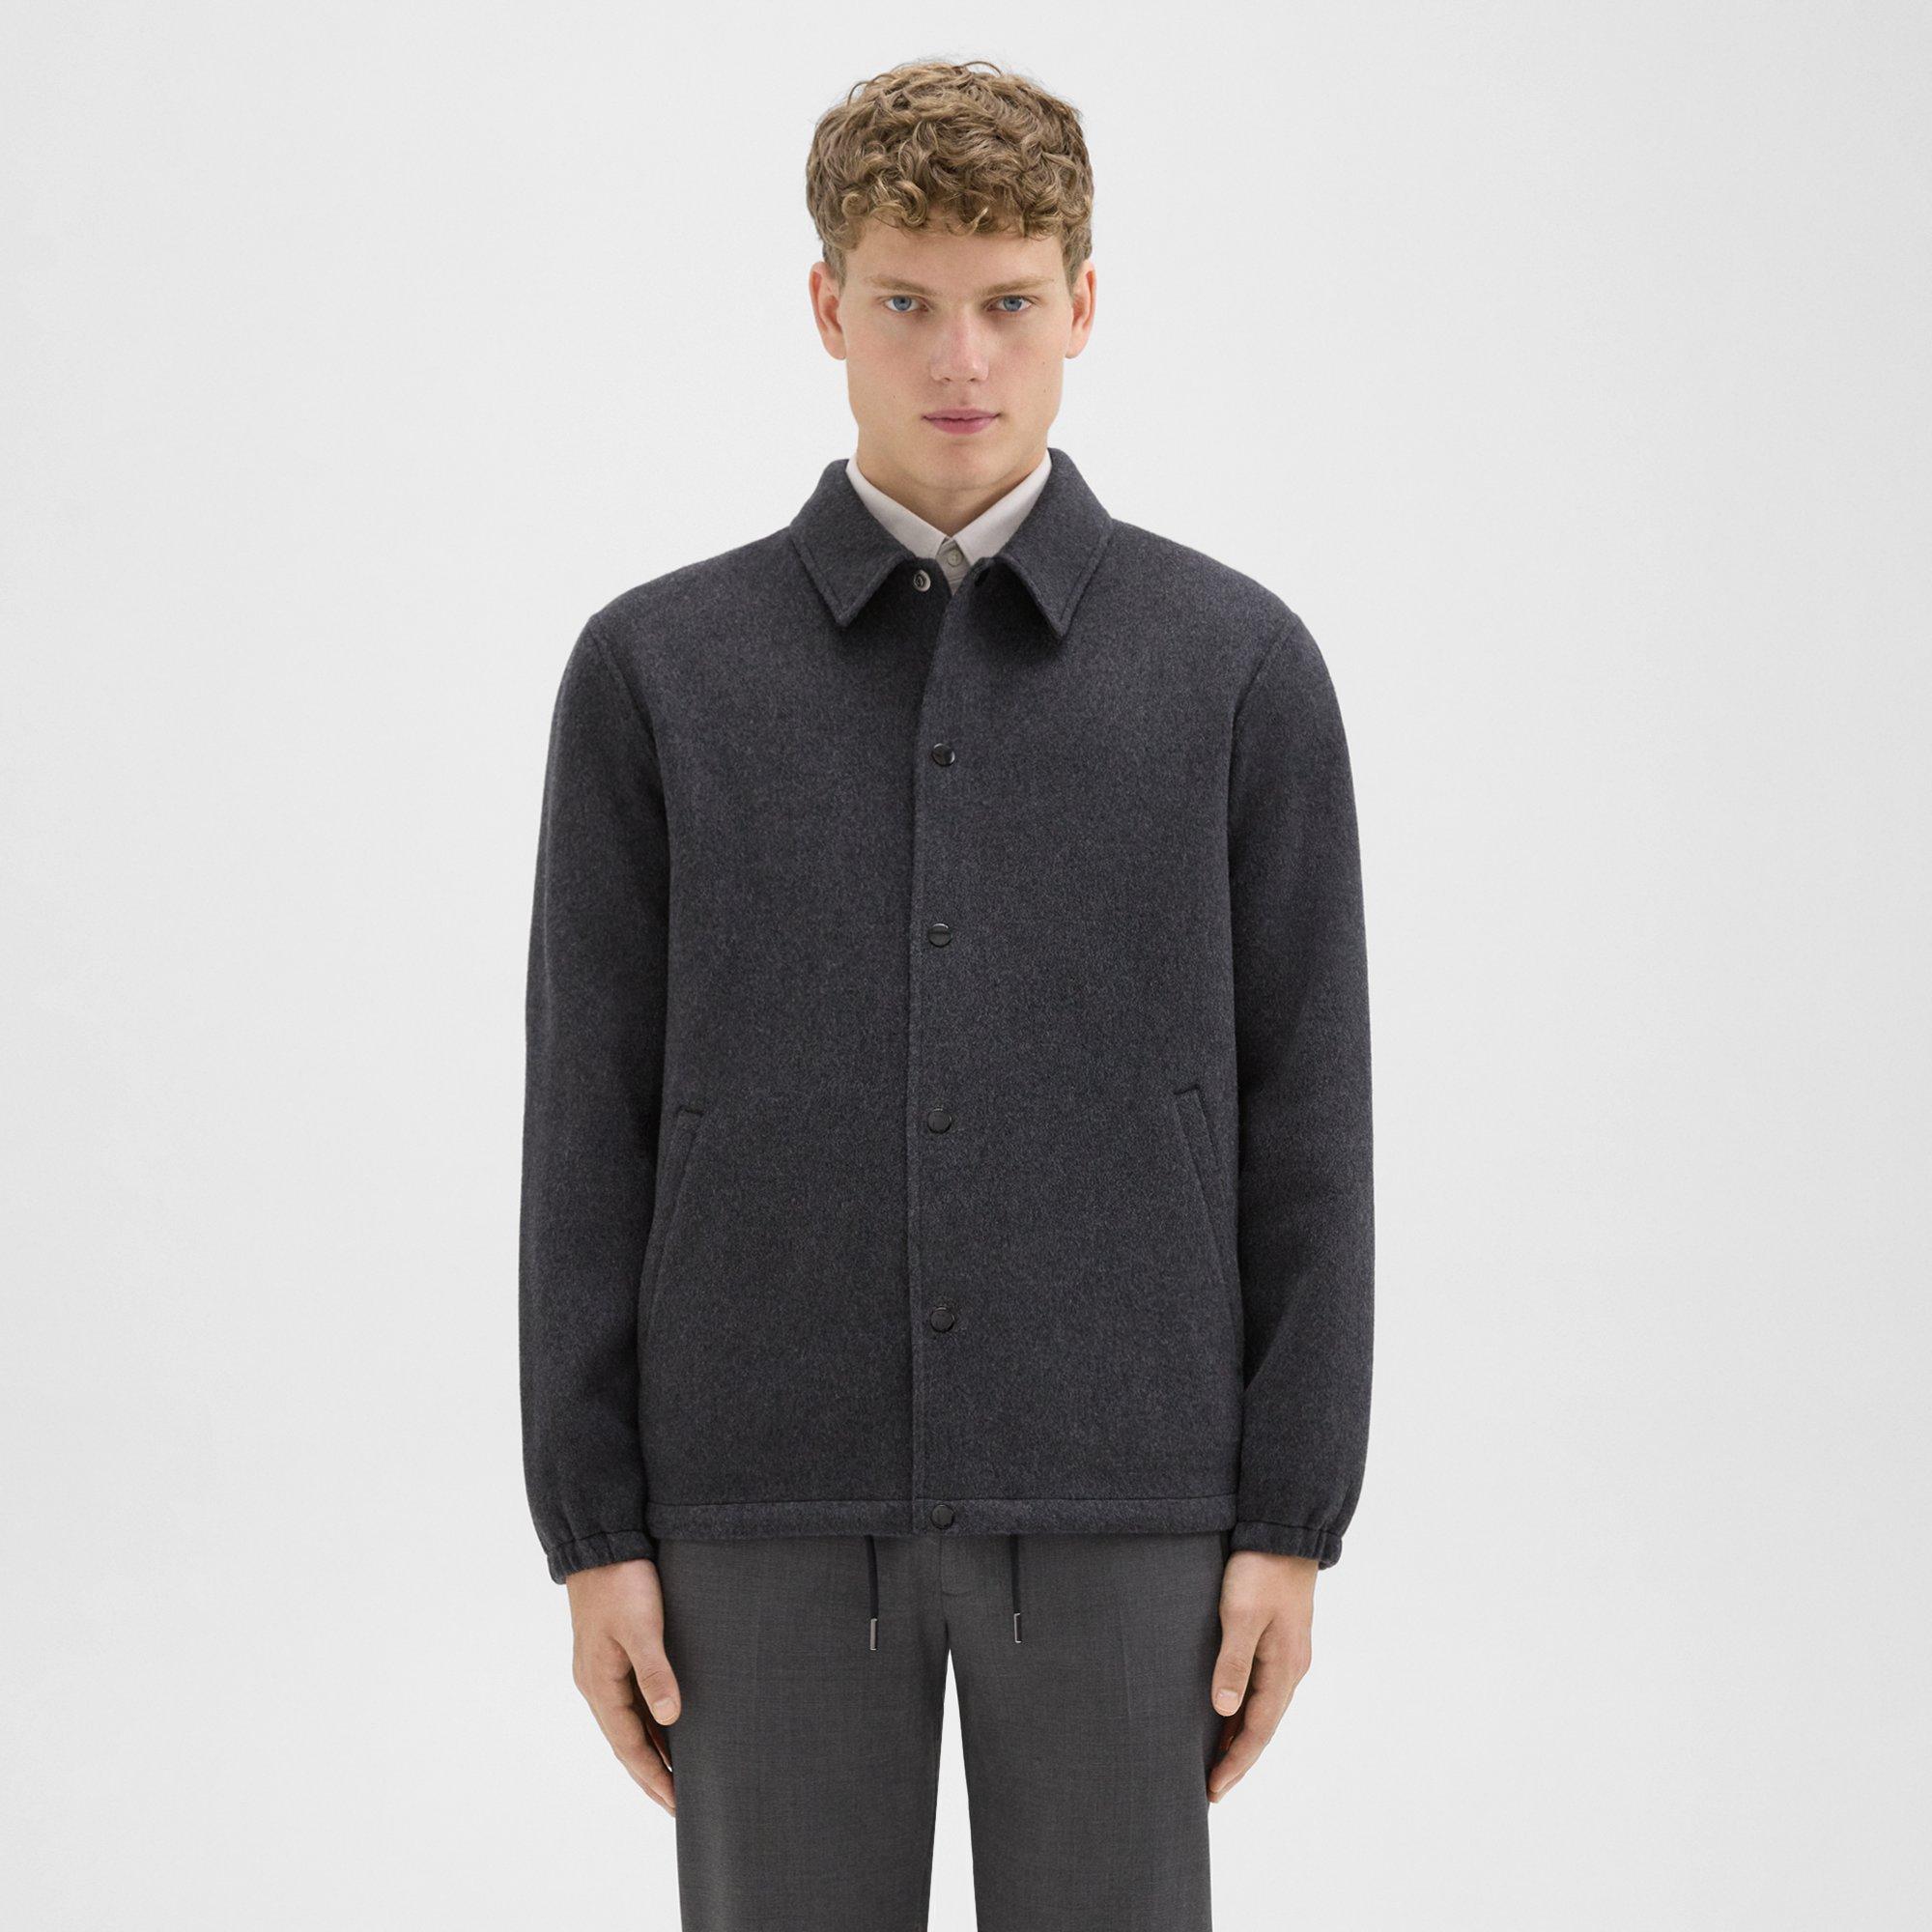 Theory Classic Coaches Jacket in Double-Face Wool-Cashmere